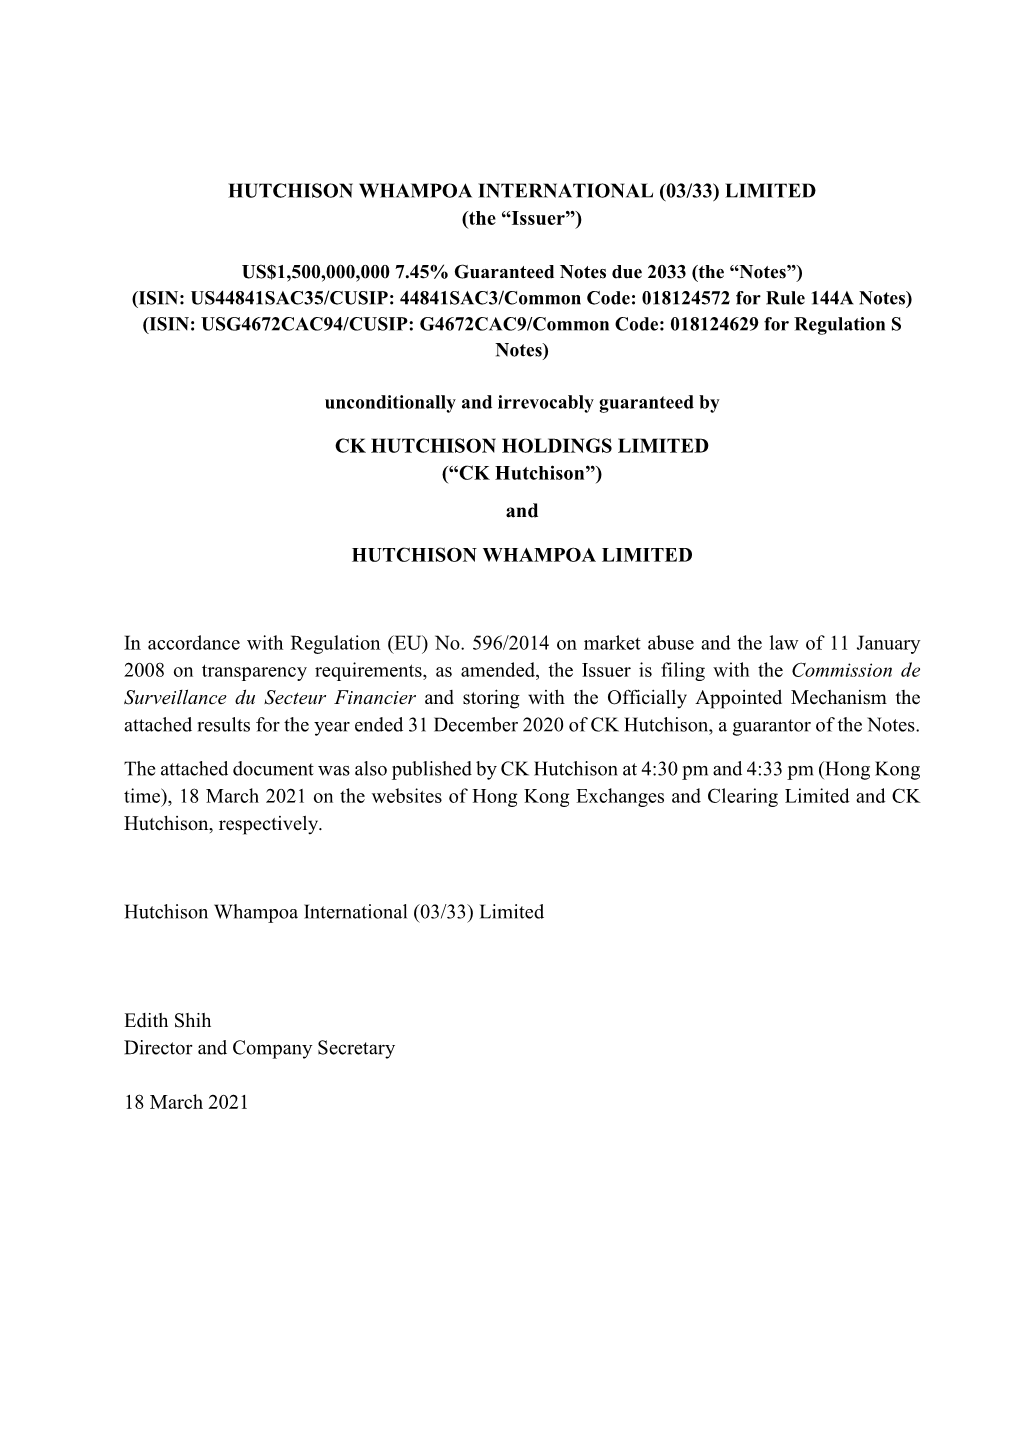 HUTCHISON WHAMPOA INTERNATIONAL (03/33) LIMITED (The “Issuer”)